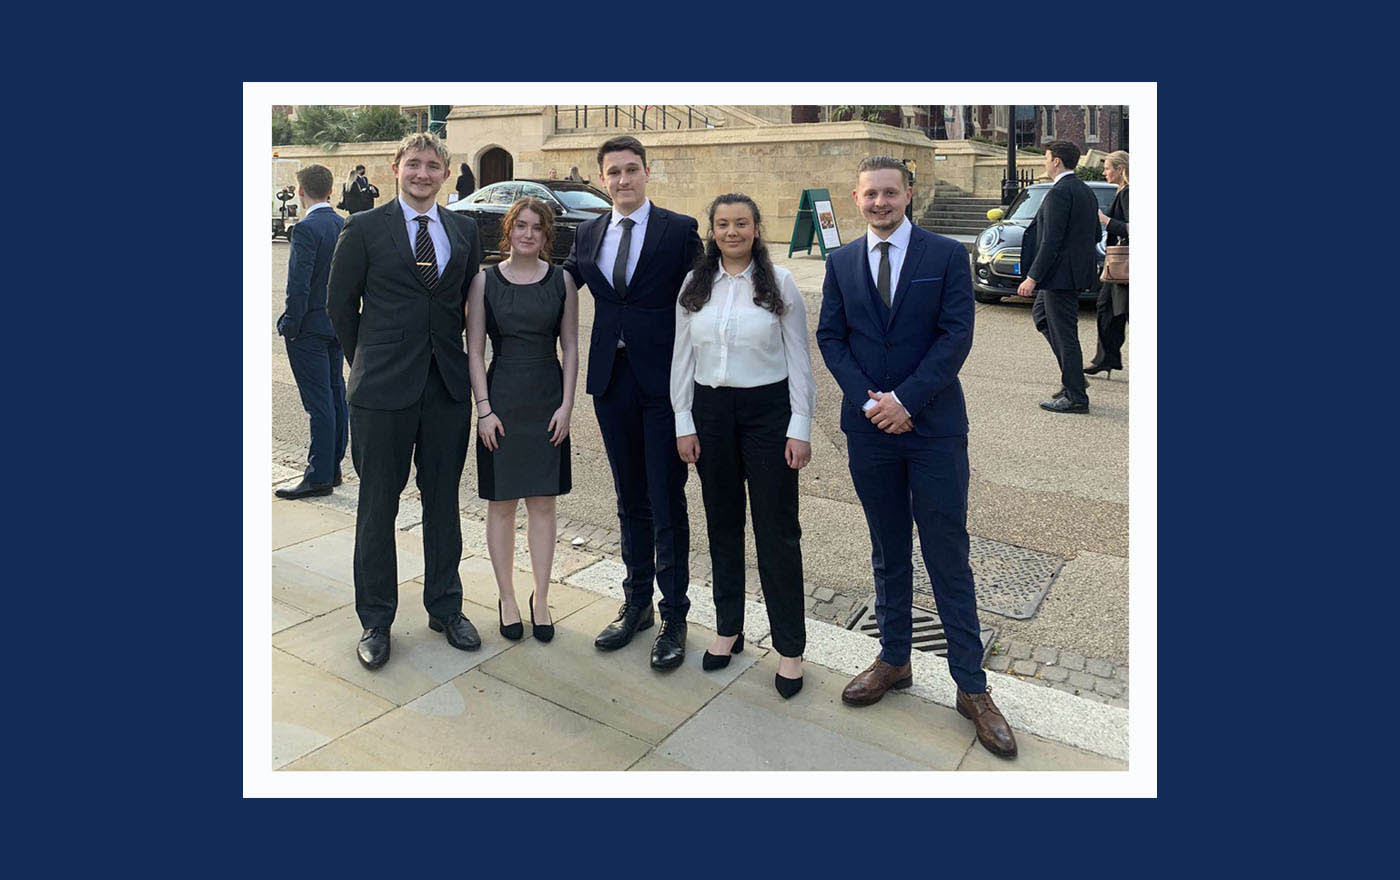 Law Students Attend Event at Lincoln’s Inn